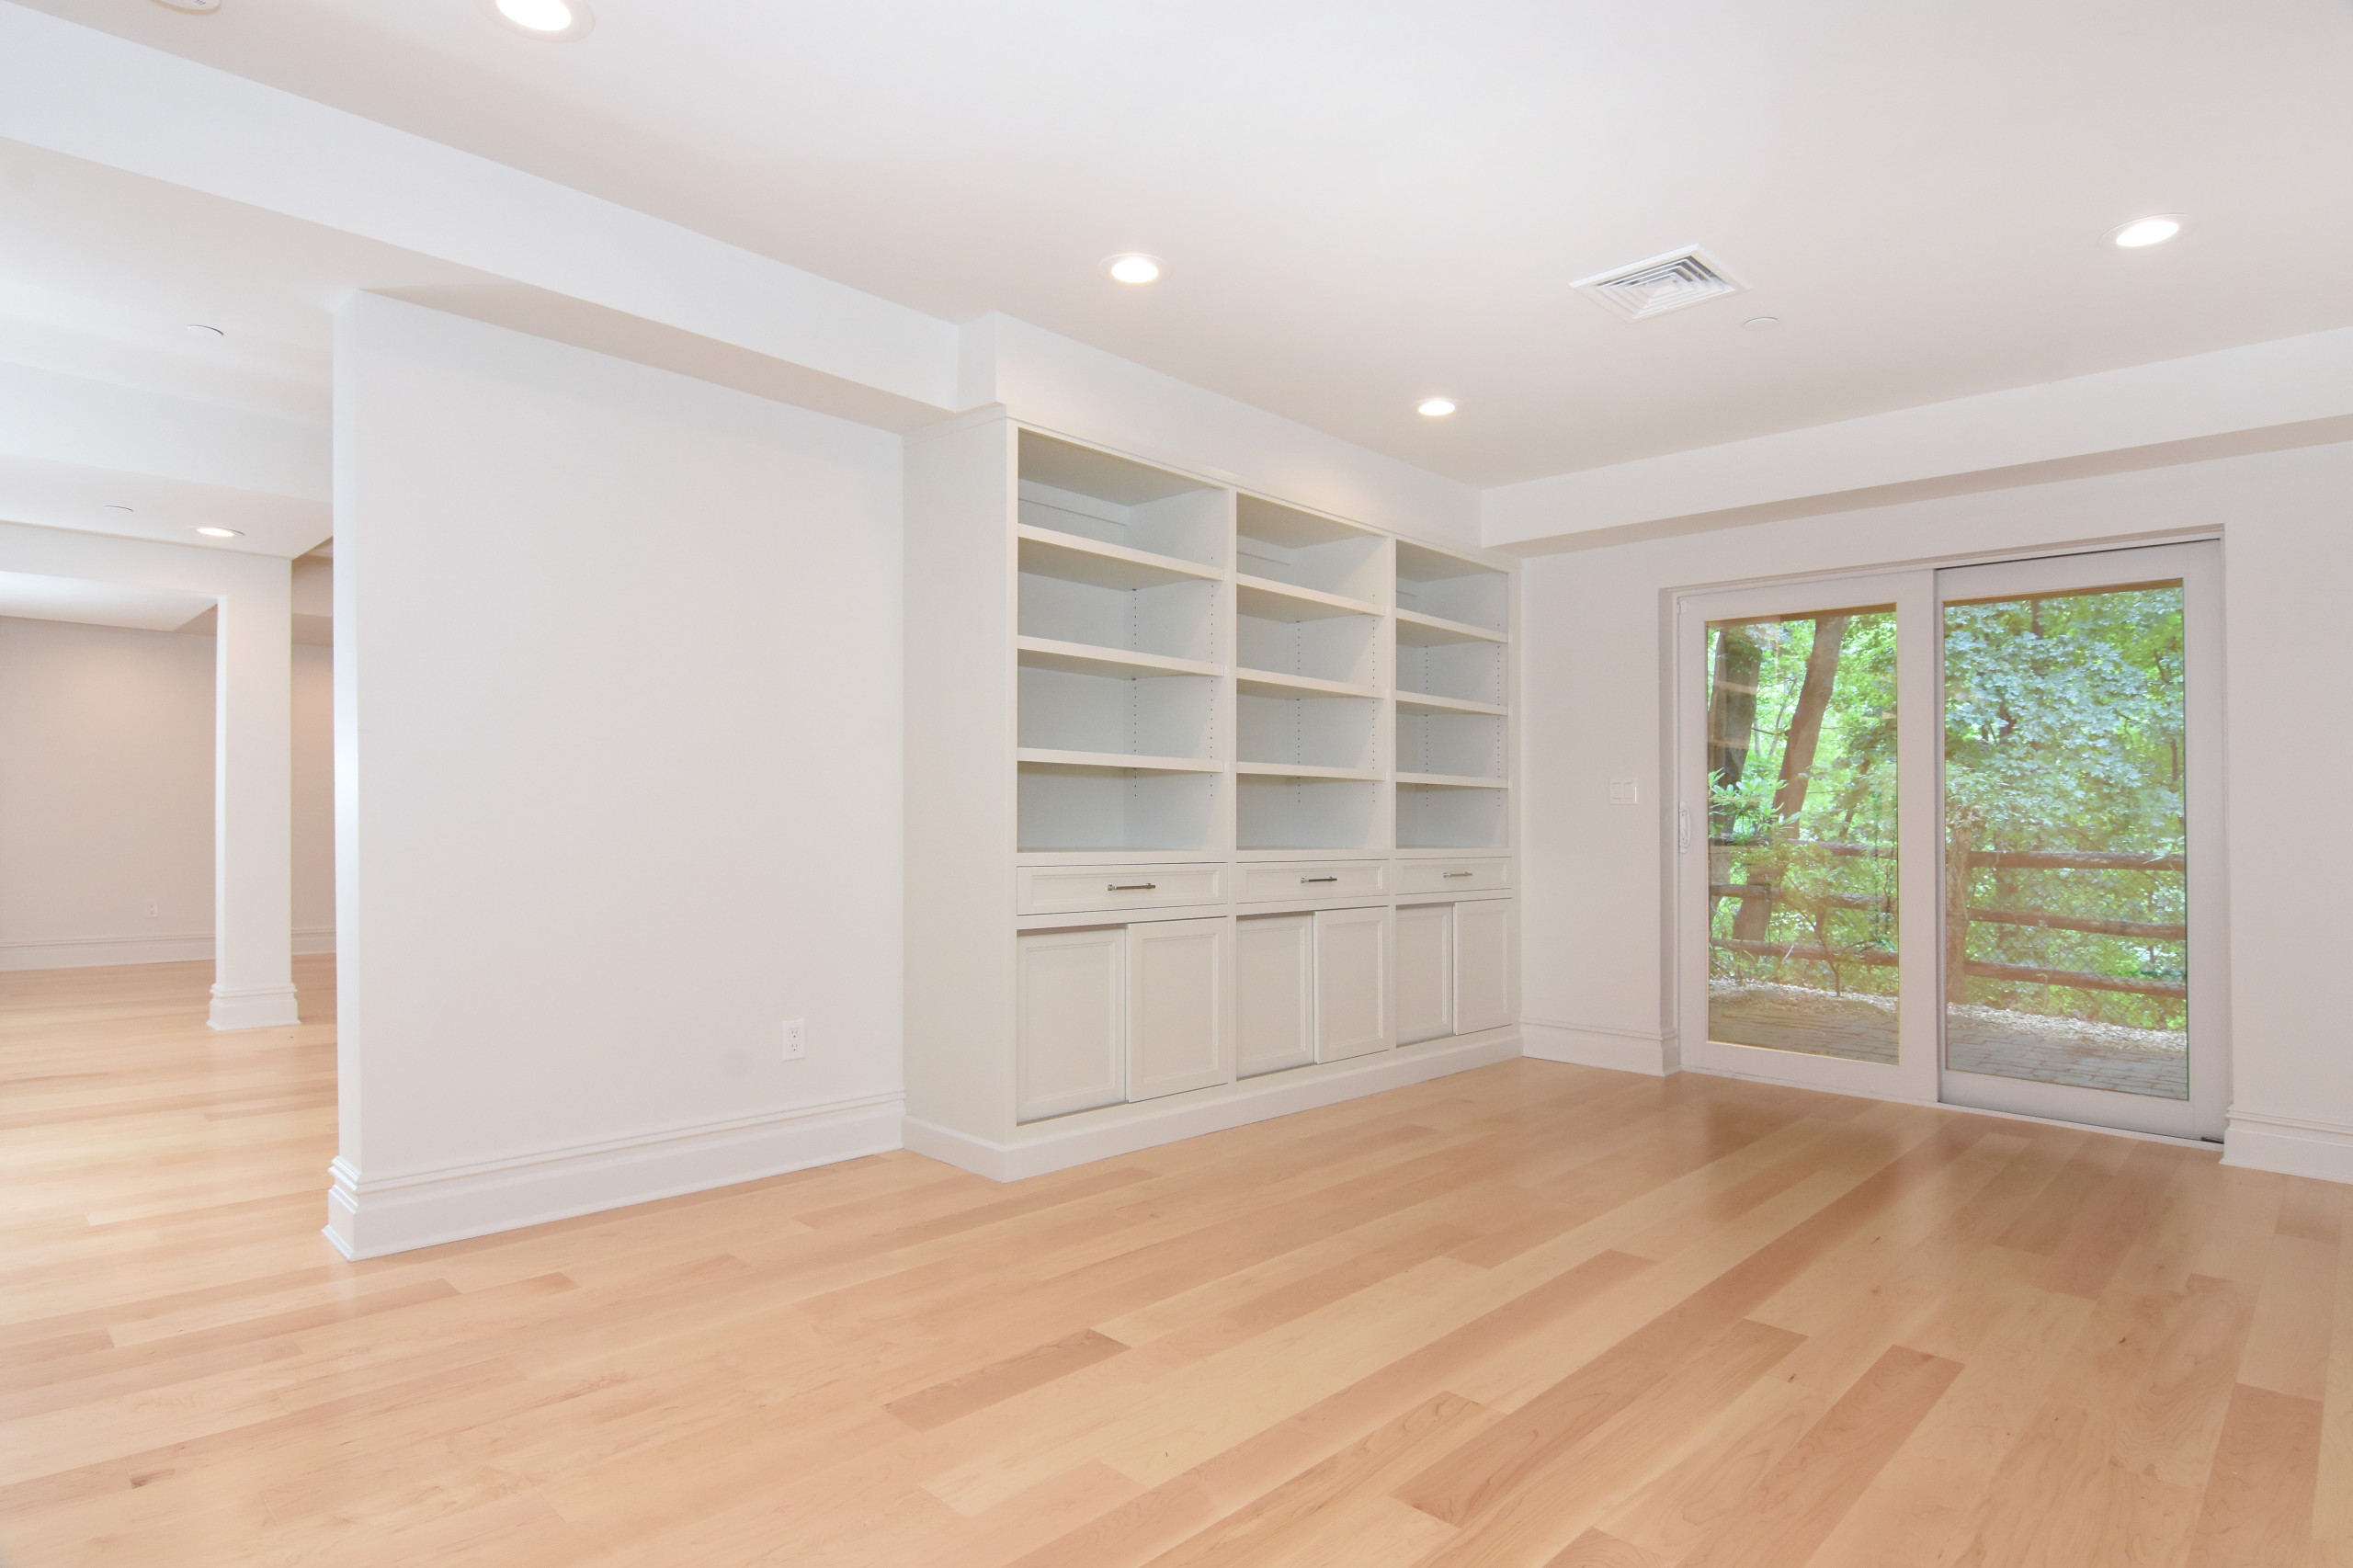 Dobbs Ferry - Home Remodel